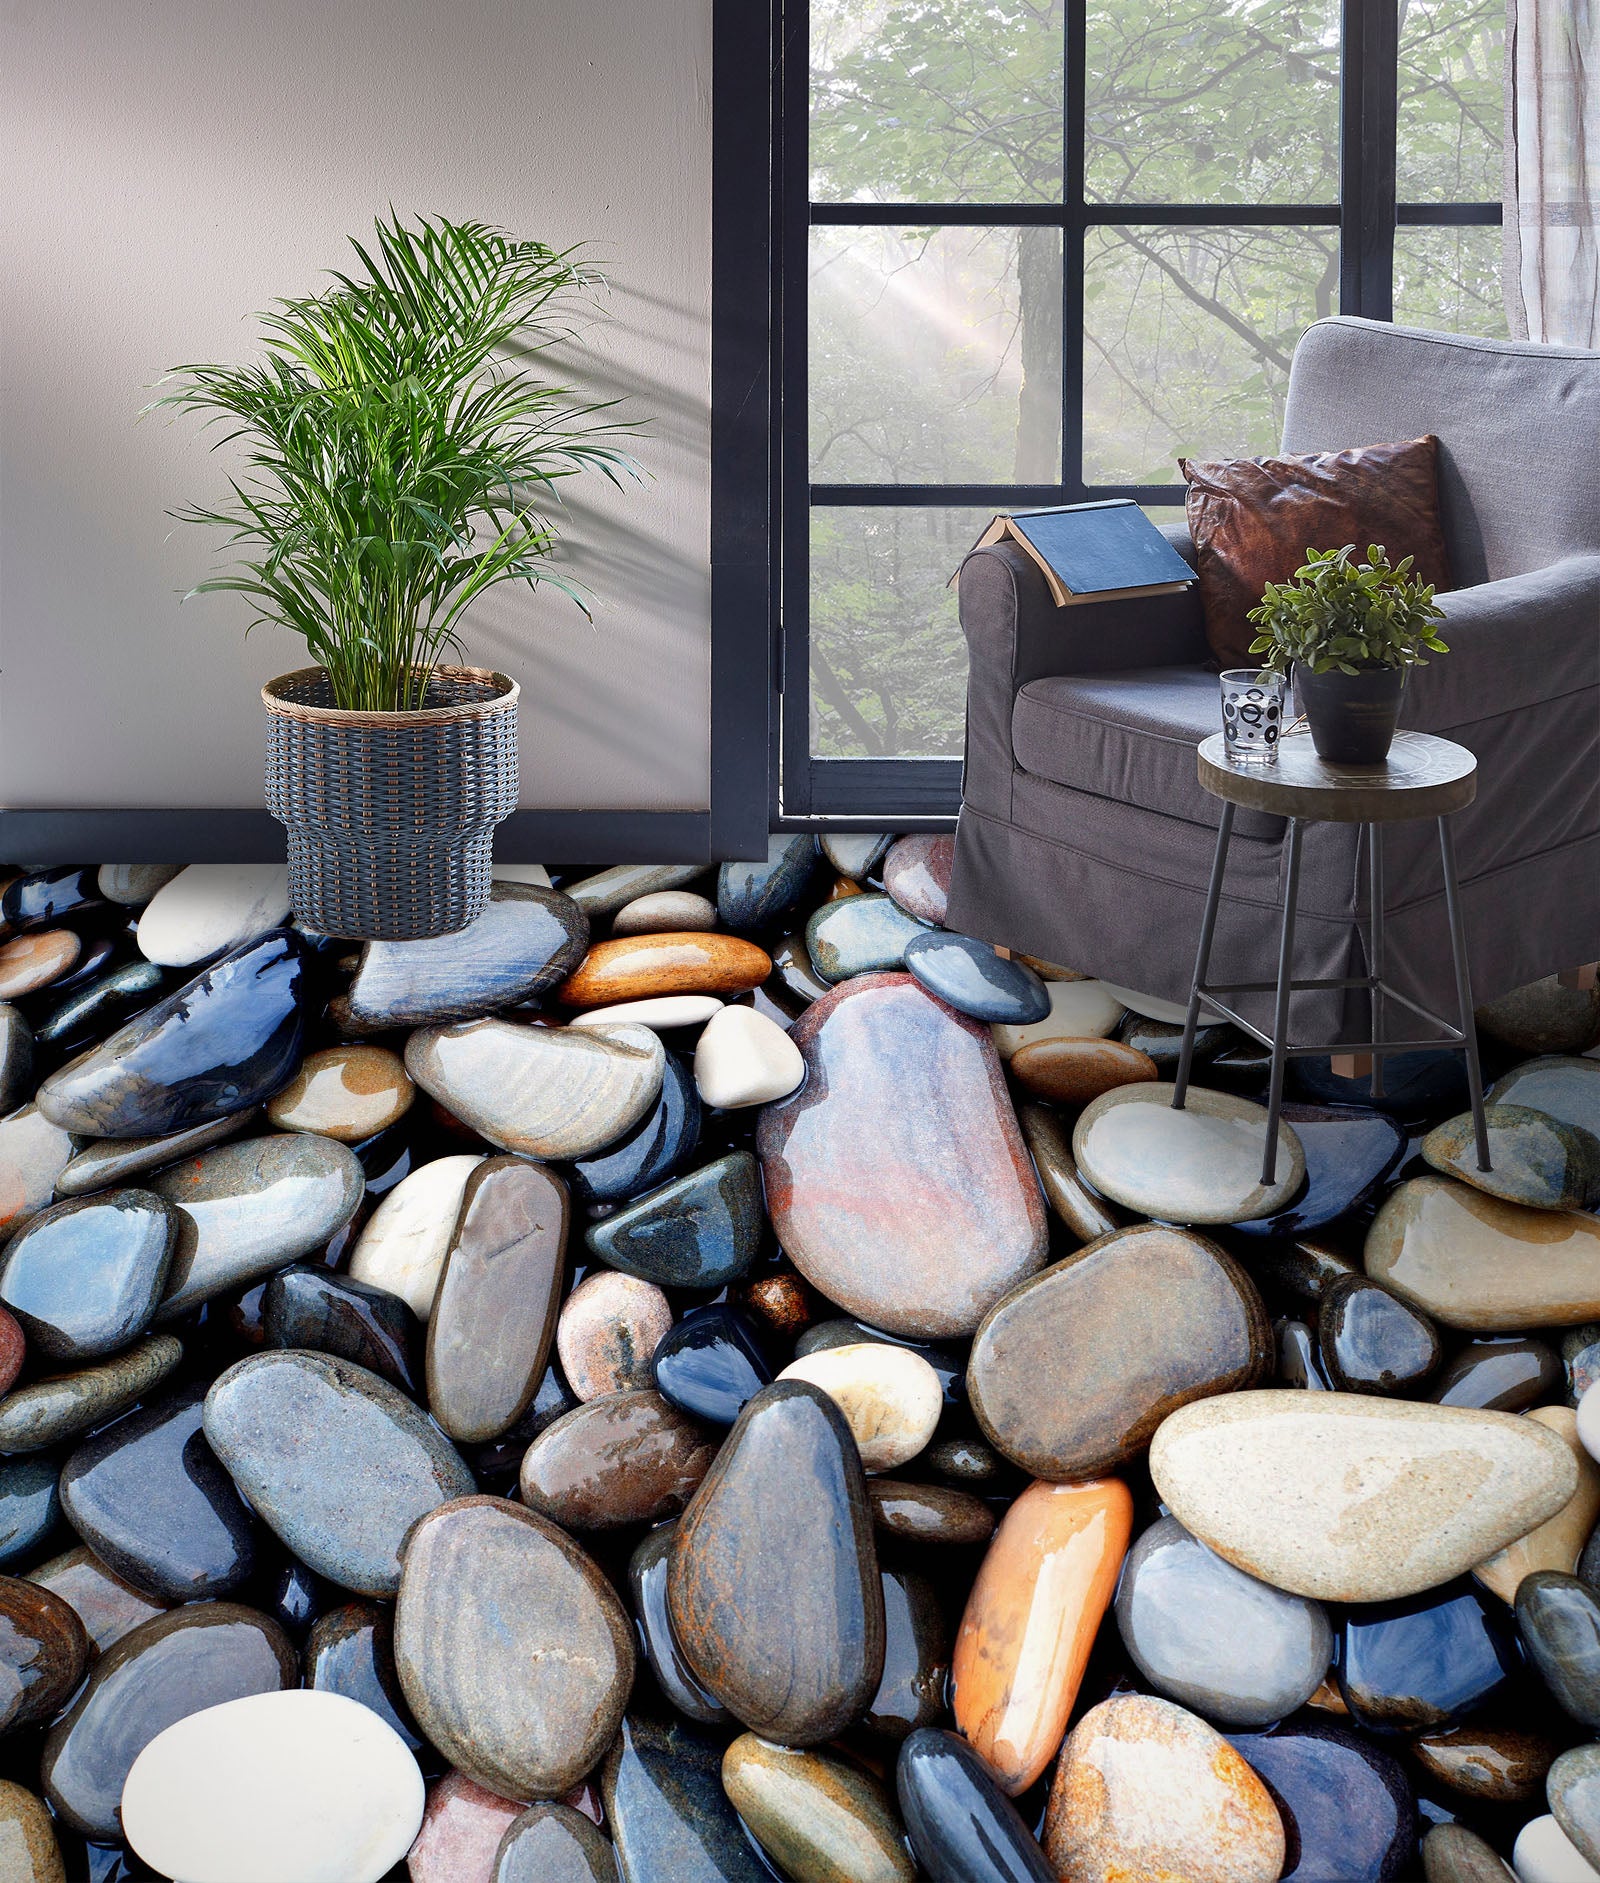 3D Smooth Colored Pebbles 978 Floor Mural  Wallpaper Murals Self-Adhesive Removable Print Epoxy